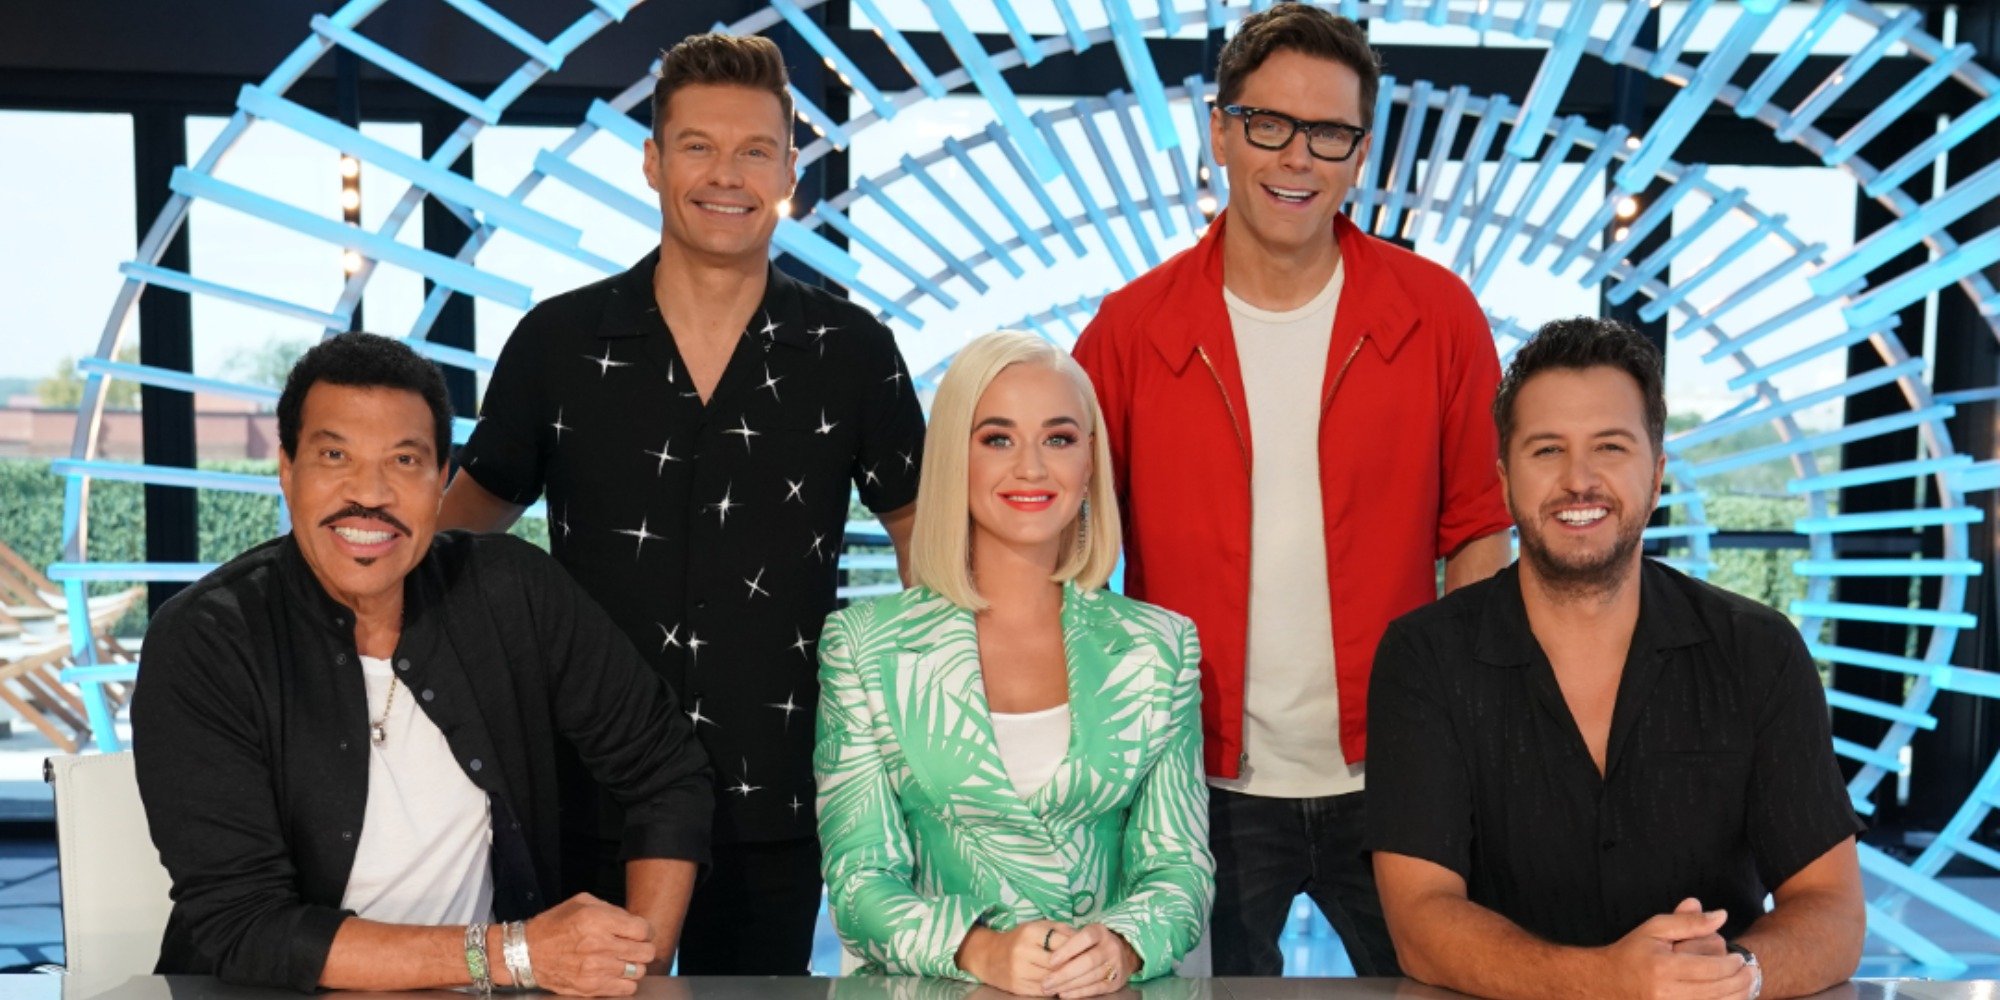 American Idol judges Lionel Richie, Katy Perry and Luke Bryan pose with Ryan Seacrest and mentor Bobby Bones in 2018.